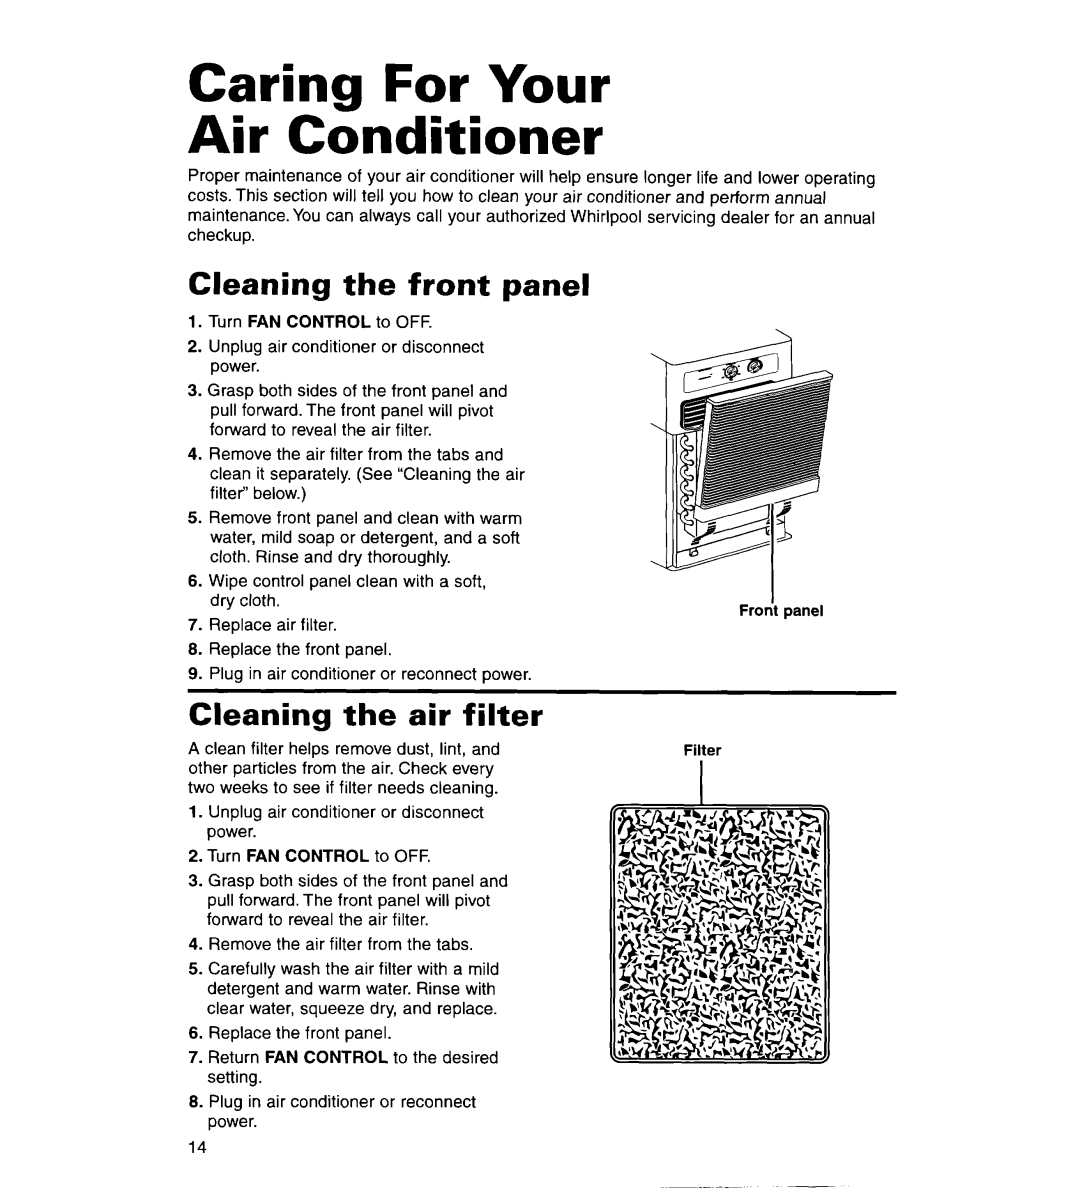 Whirlpool ACS072XG, ACS102XG warranty Caring For Your Air Conditioner, Cleaning the front panel, Cleaning the air filter 